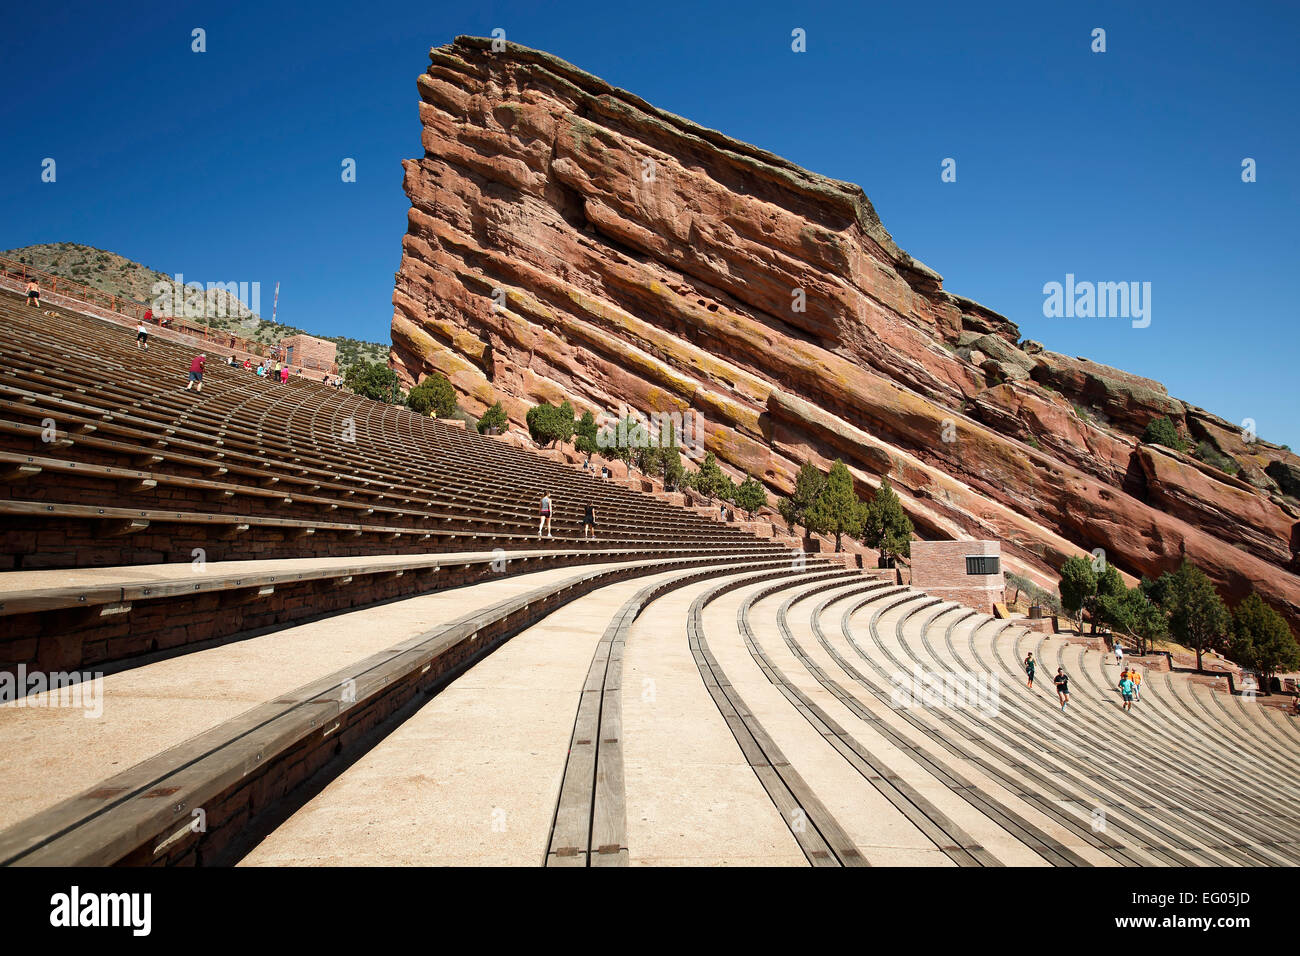 Red Rocks Amphitheatre with runners and walkers, Morrison, Colorado USA Stock Photo